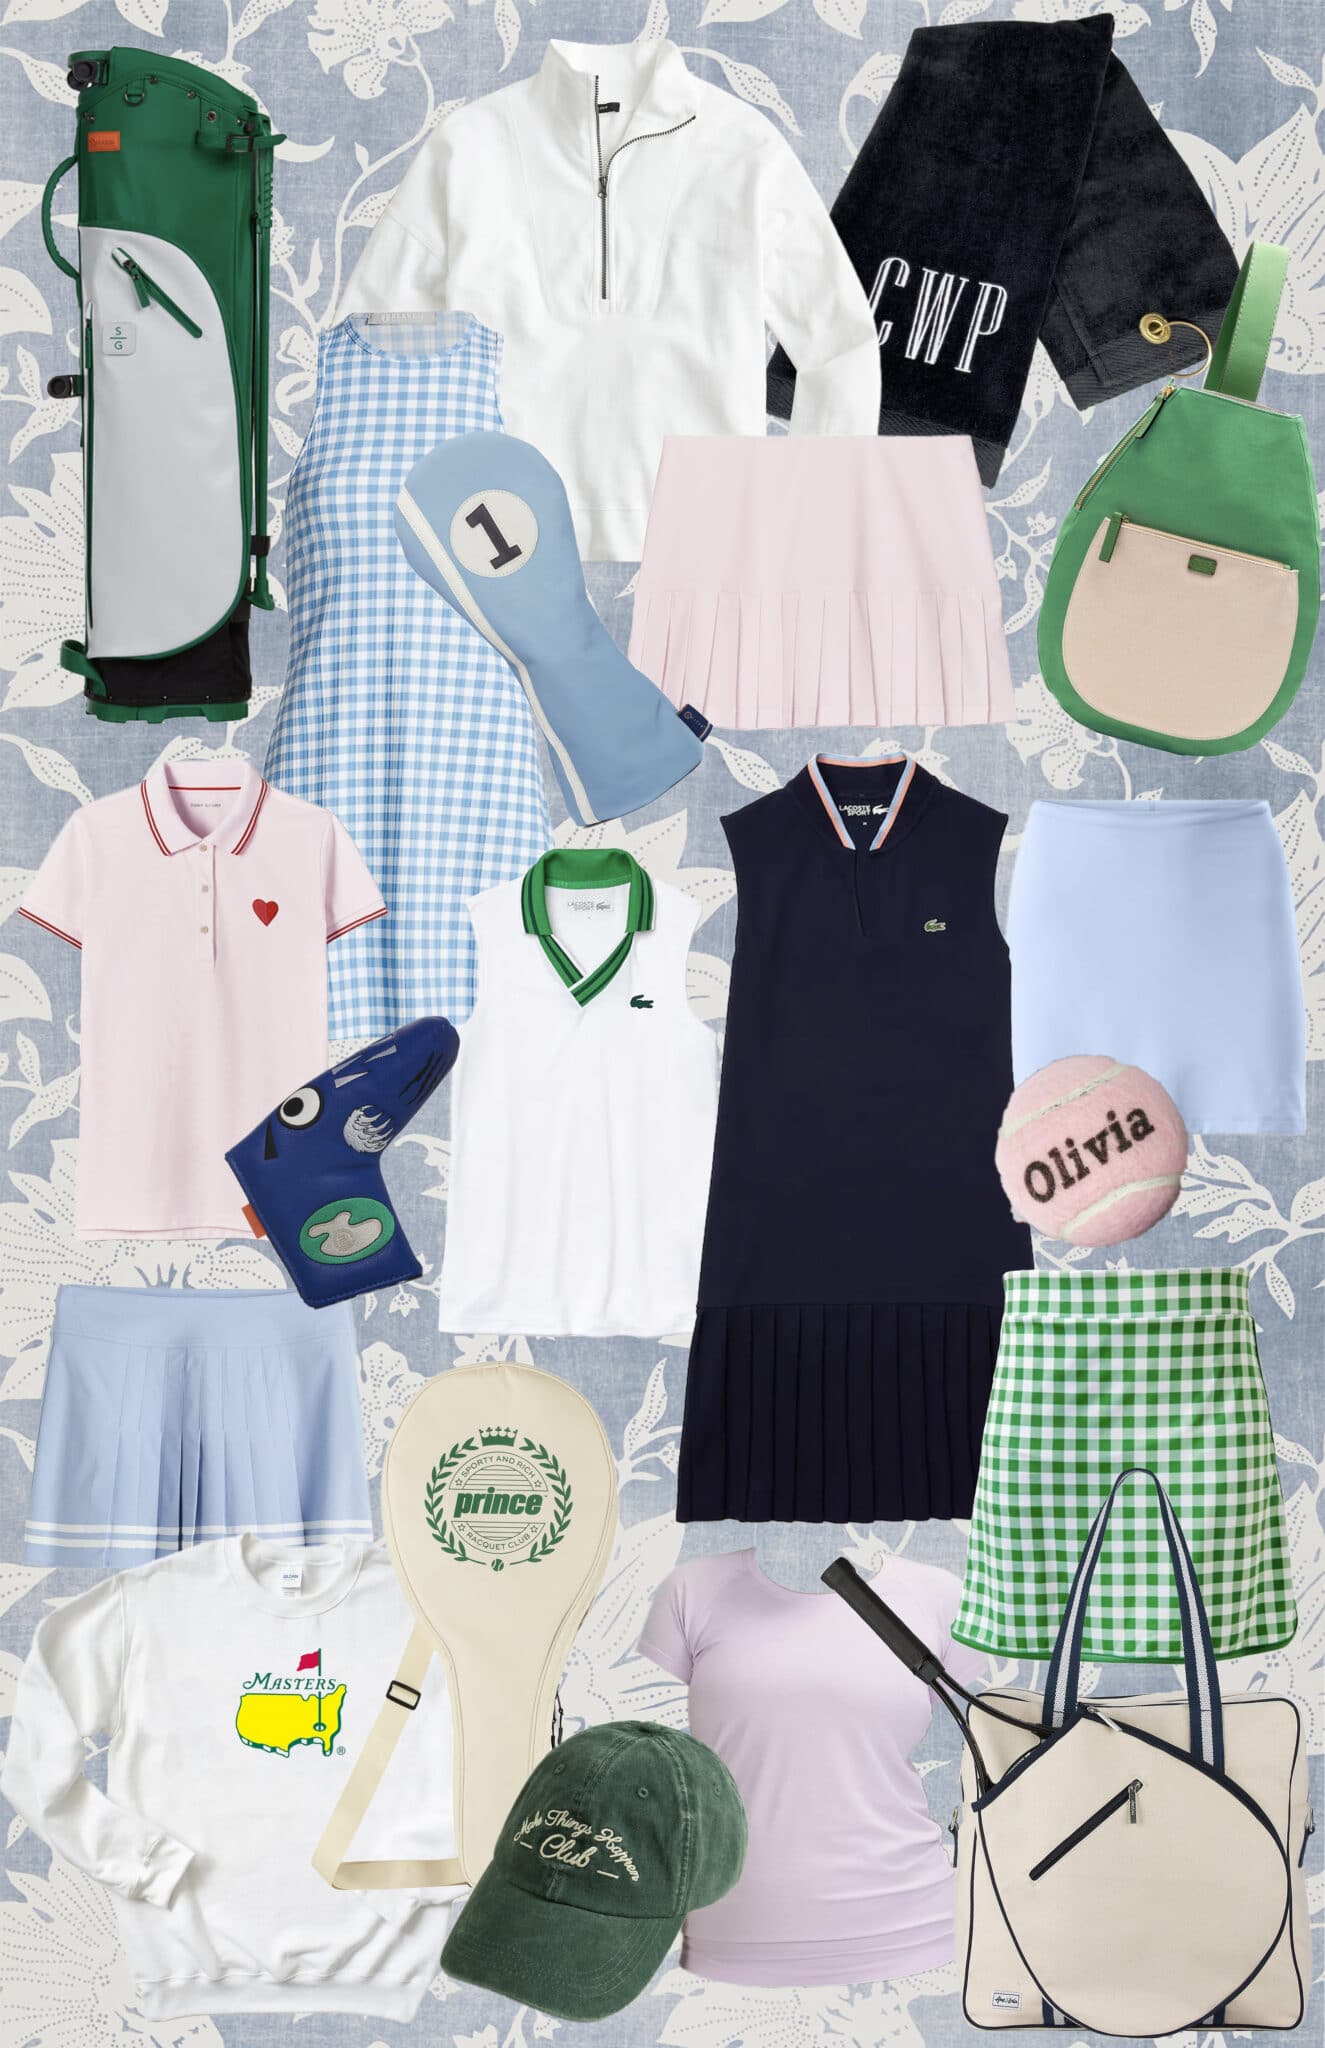 golf and tennis spring clothing